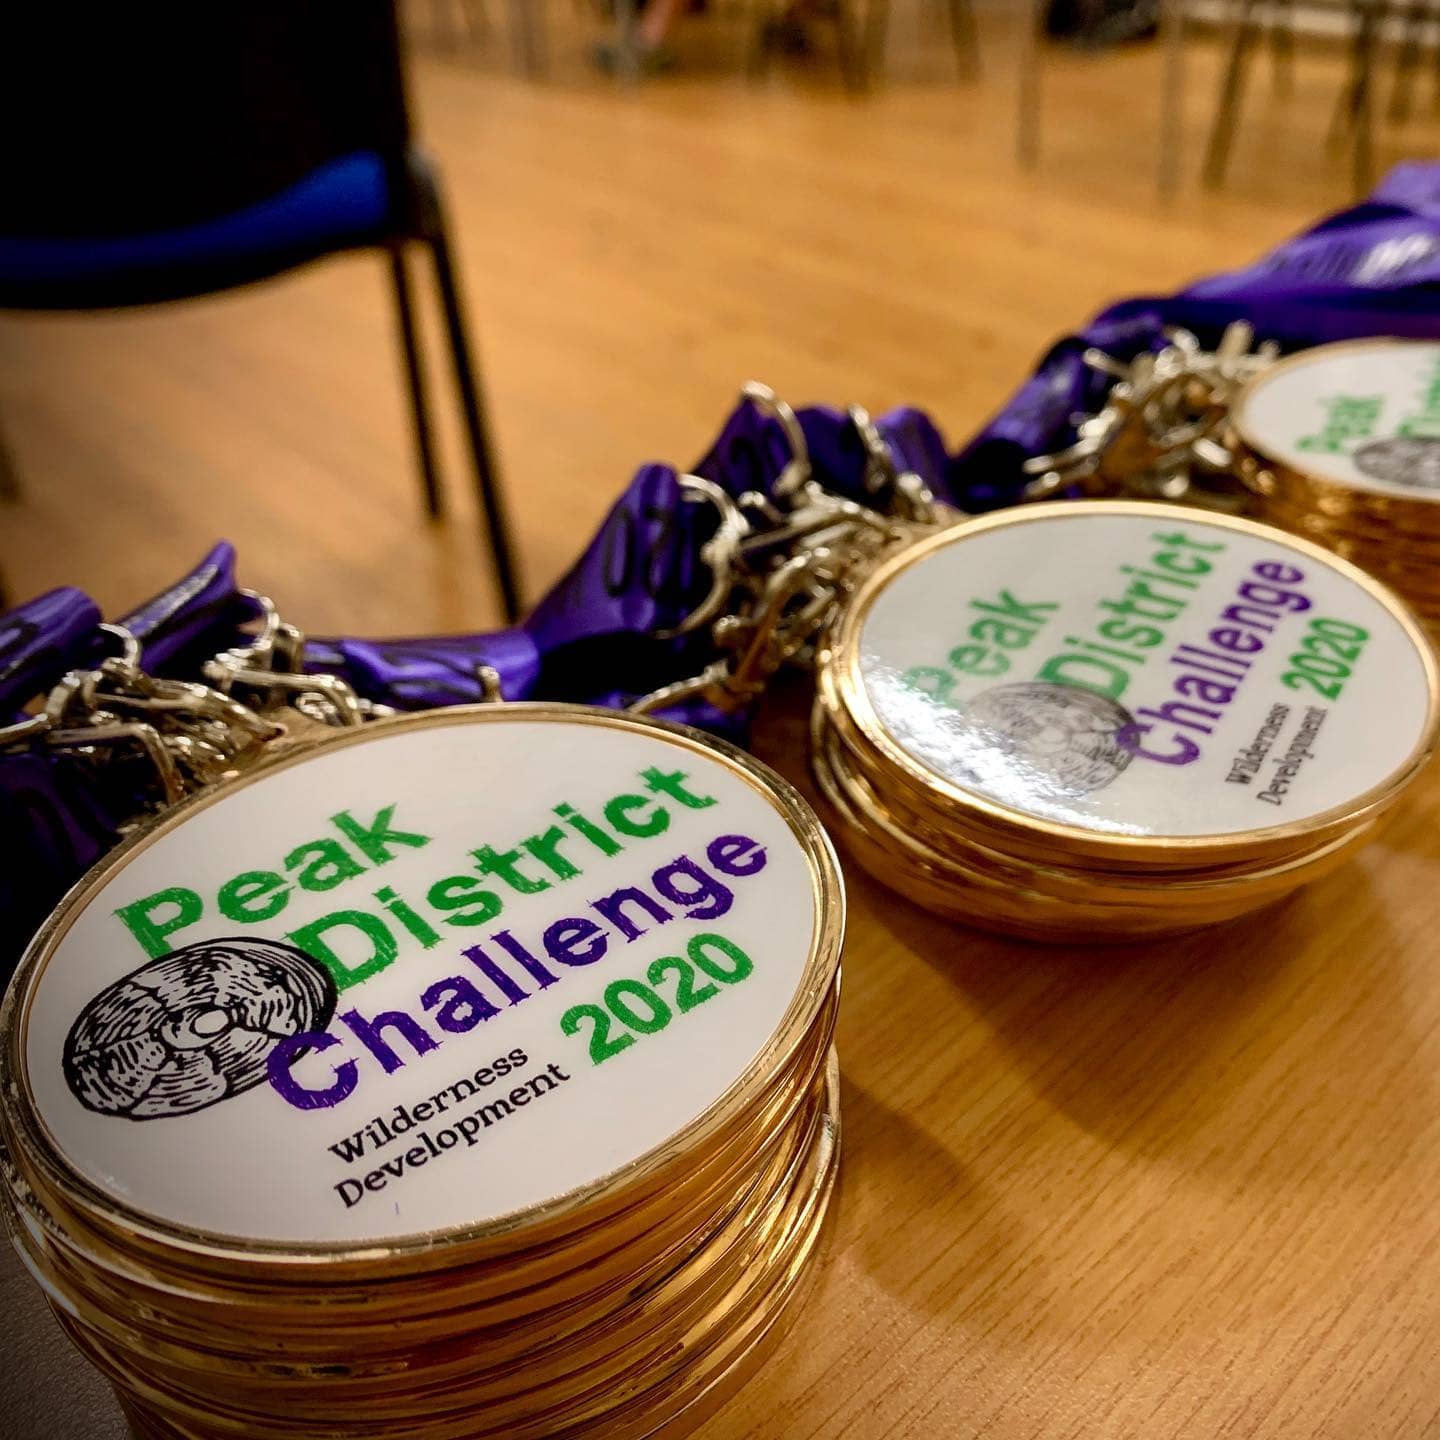 Our first wave of challengers have left and we’re getting everyone’s medals ready for tomorrow 🏅⛰🏅 
